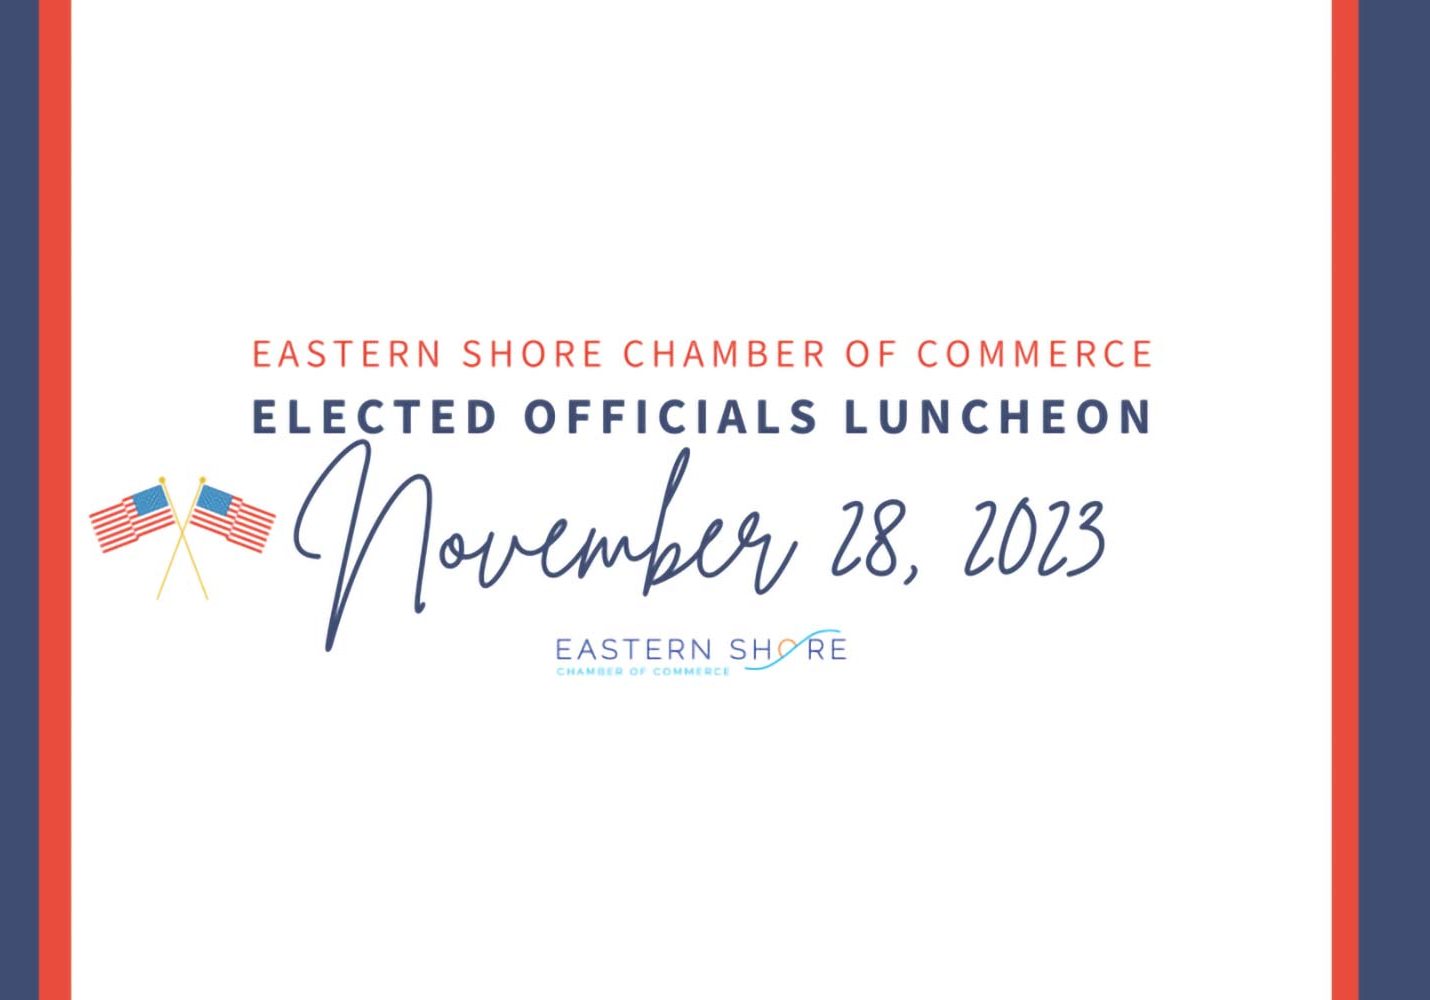 Eastern Shore Elected Officials Luncheon Announced